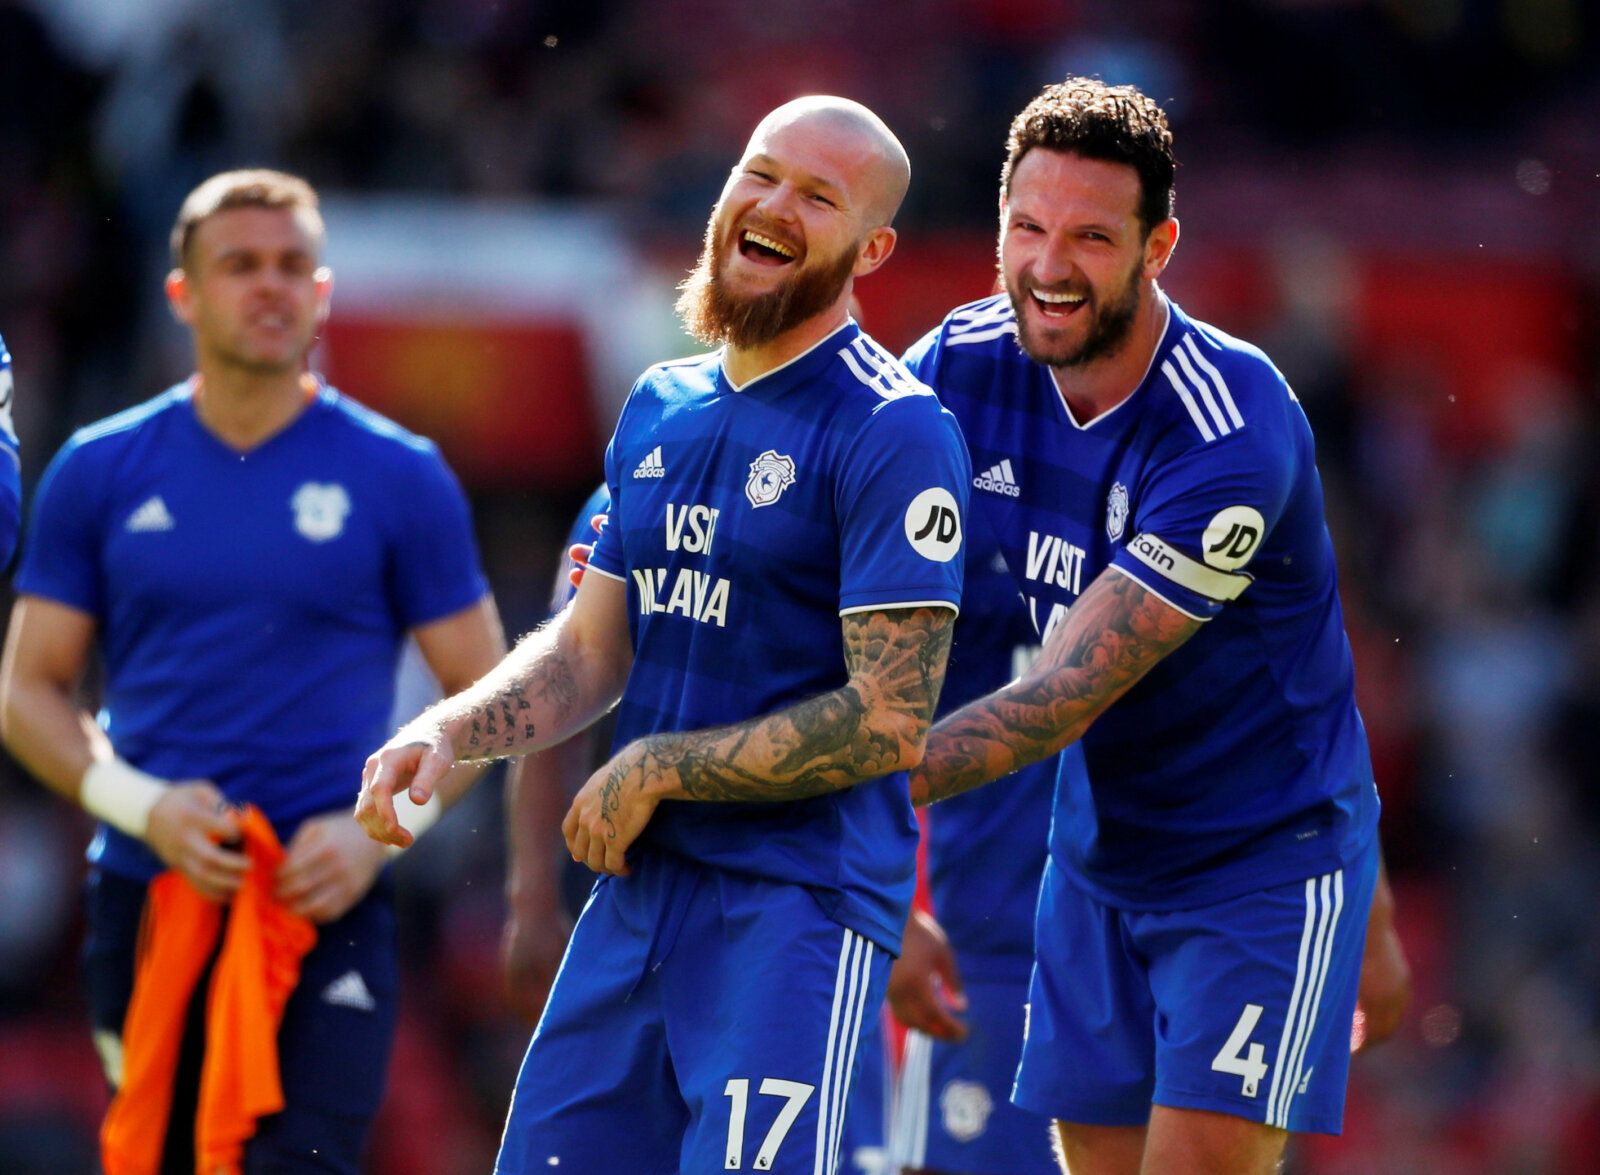 Soccer Football - Premier League - Manchester United v Cardiff City - Old Trafford, Manchester, Britain - May 12, 2019  Cardiff City's Aron Gunnarsson celebrates after the match with Sean Morrison    Action Images via Reuters/Lee Smith  EDITORIAL USE ONLY. No use with unauthorized audio, video, data, fixture lists, club/league logos or 